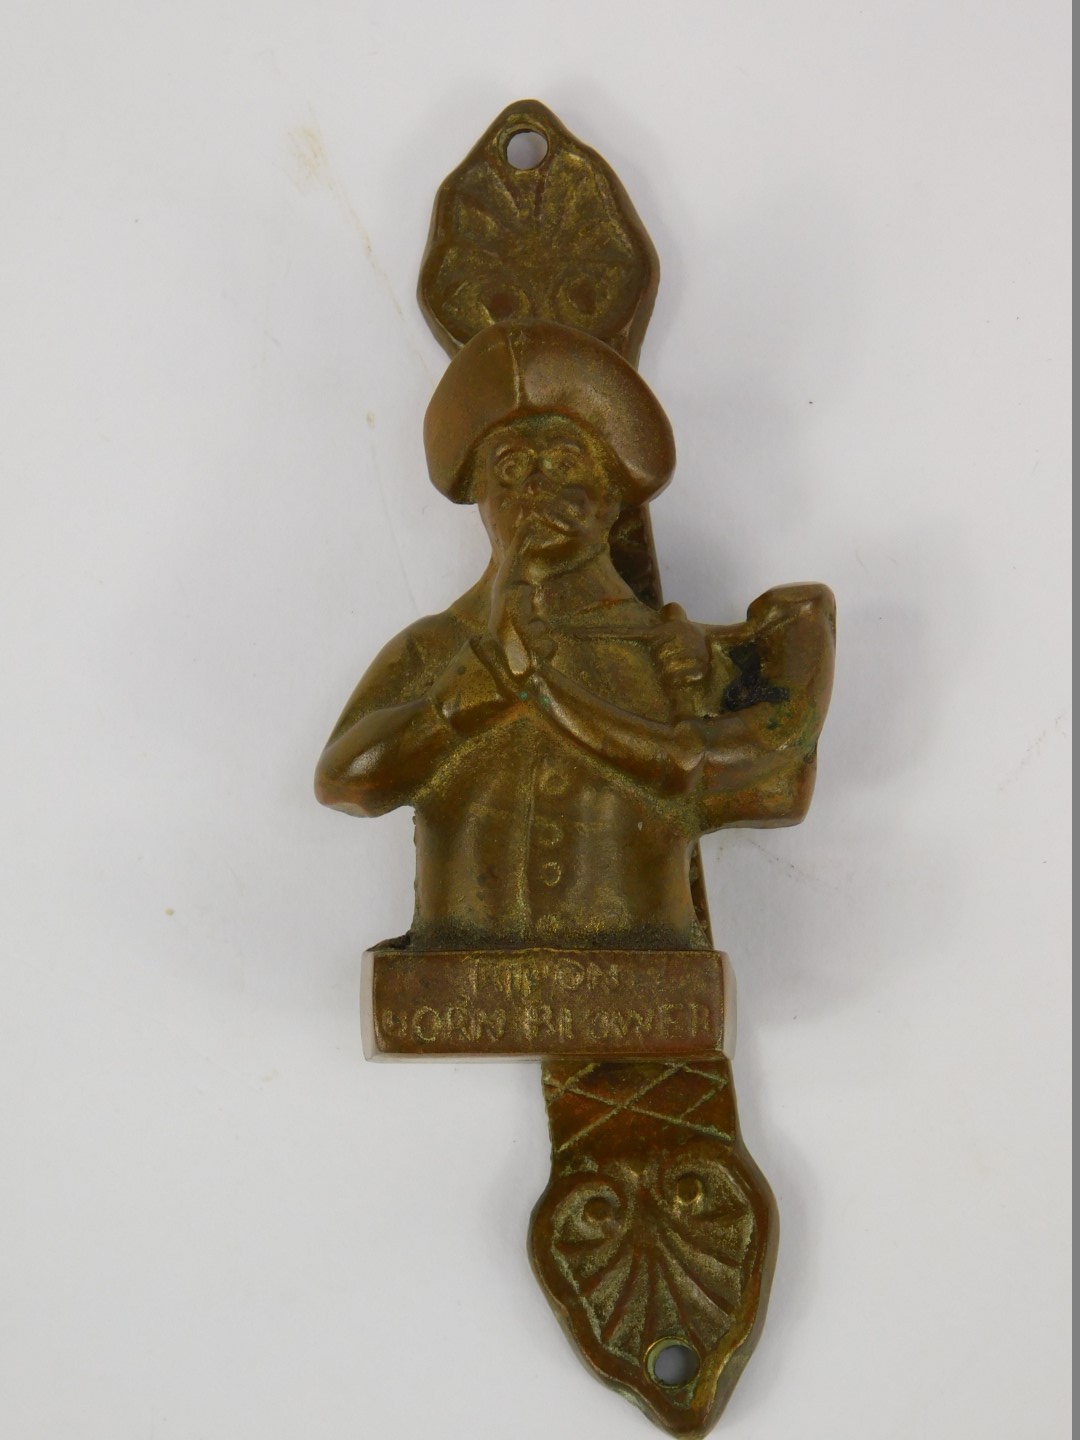 Three reproduction door knockers, comprising a brass door knocker of John Peel, with wheat sheaf top - Image 2 of 4